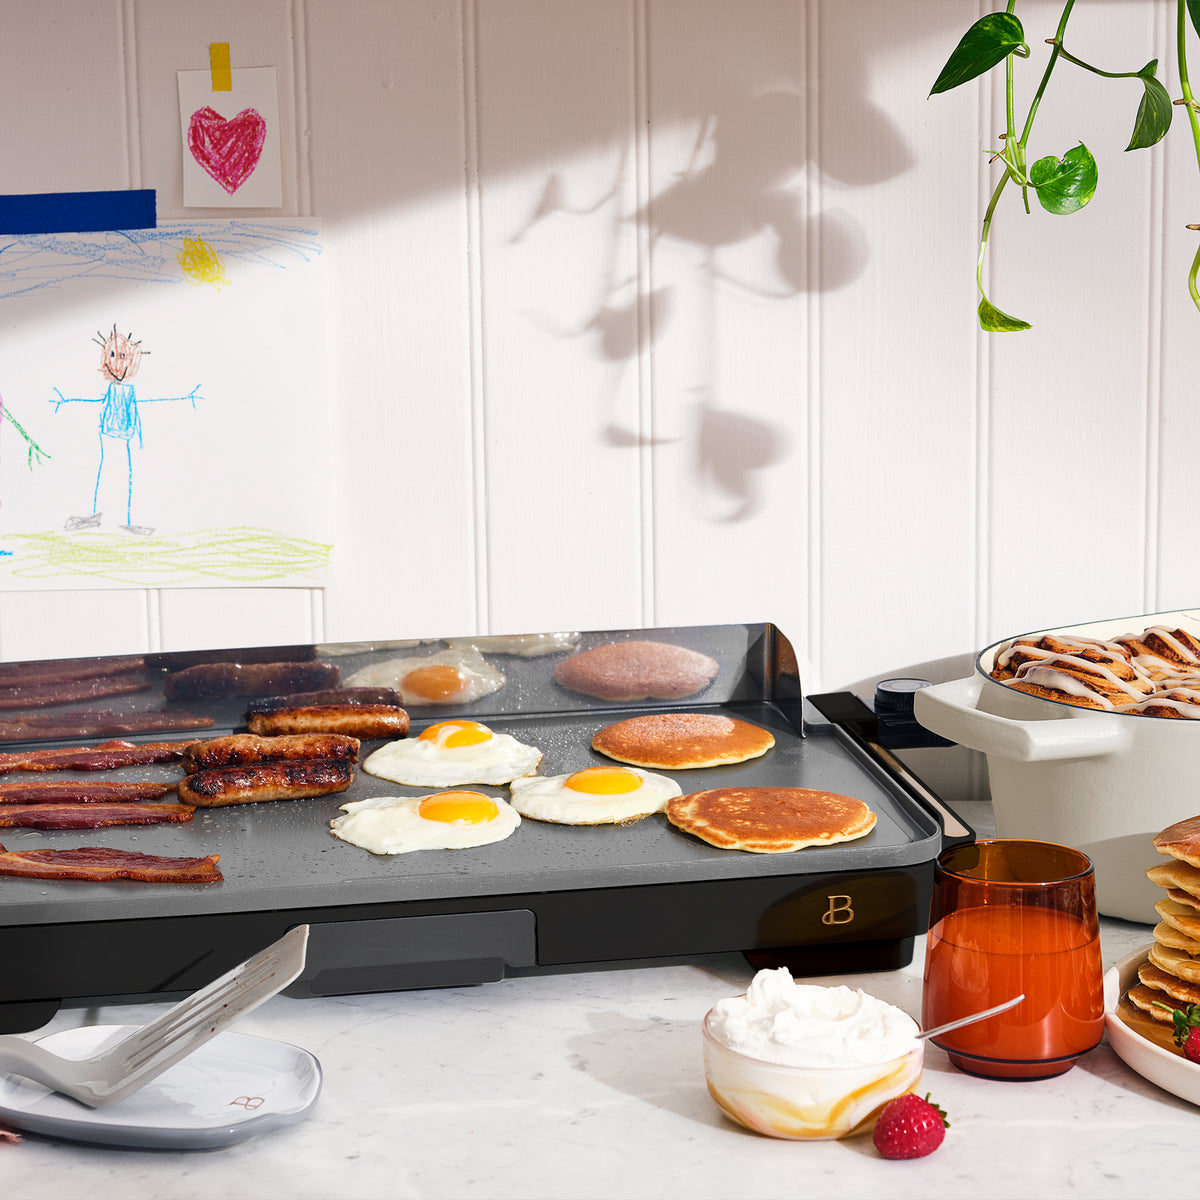 Removable Cooking Surface Electric Griddles at